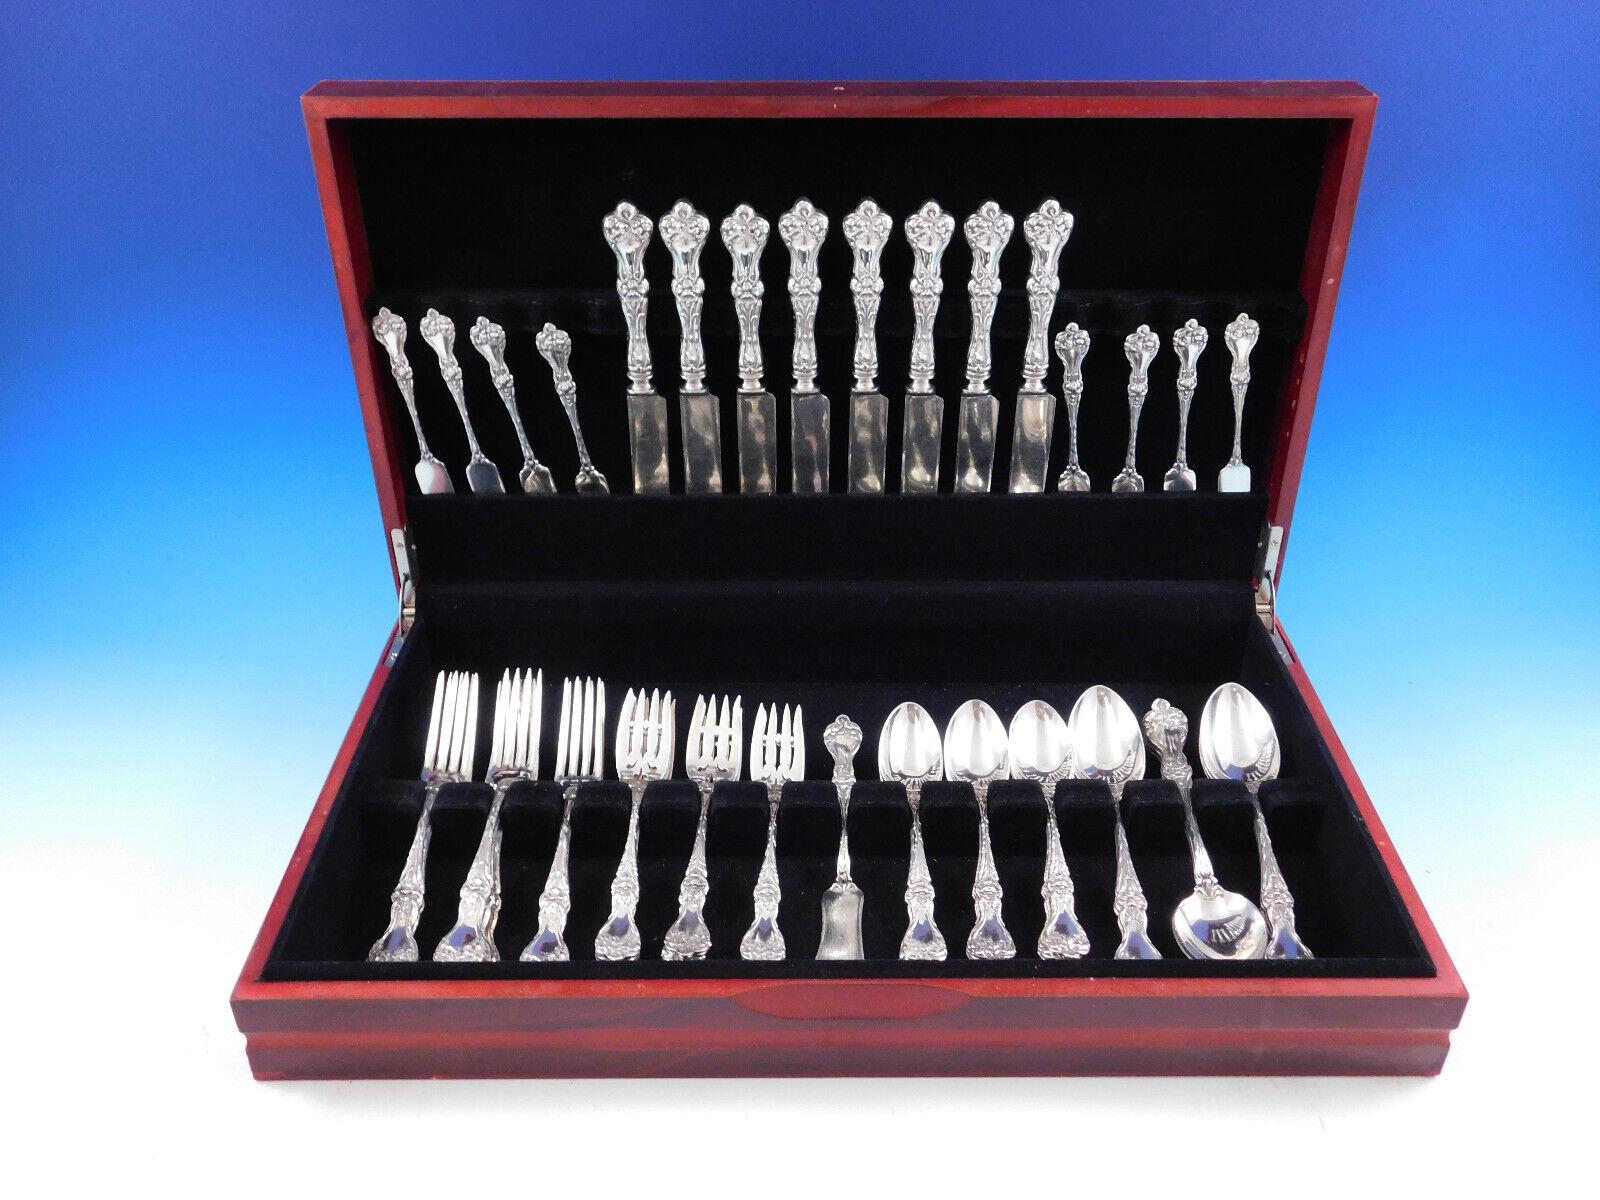 Stunning Majestic by Alvin sterling silver flatware set - 49 pieces. This set includes:



8 knives, 9